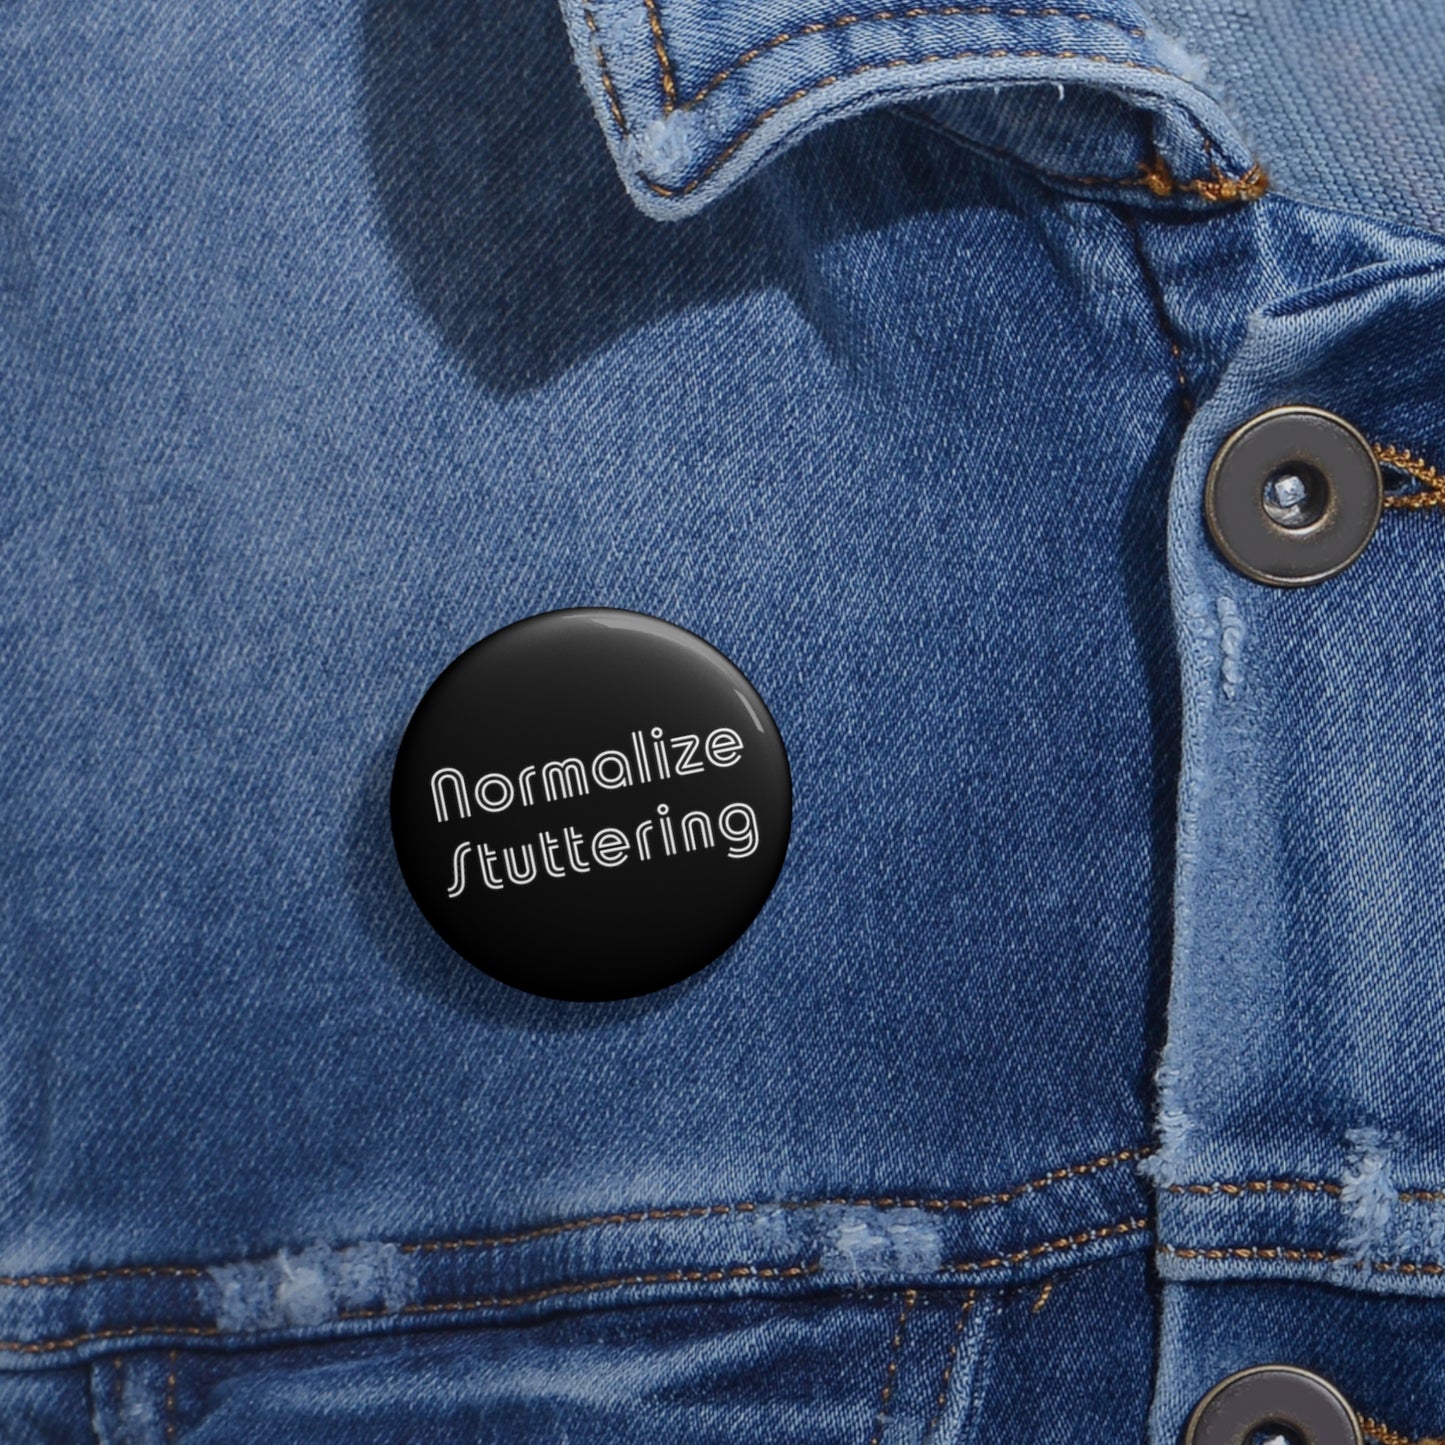 Normalize Stuttering Retro Pin Button 1.25" 2.25" or 3"